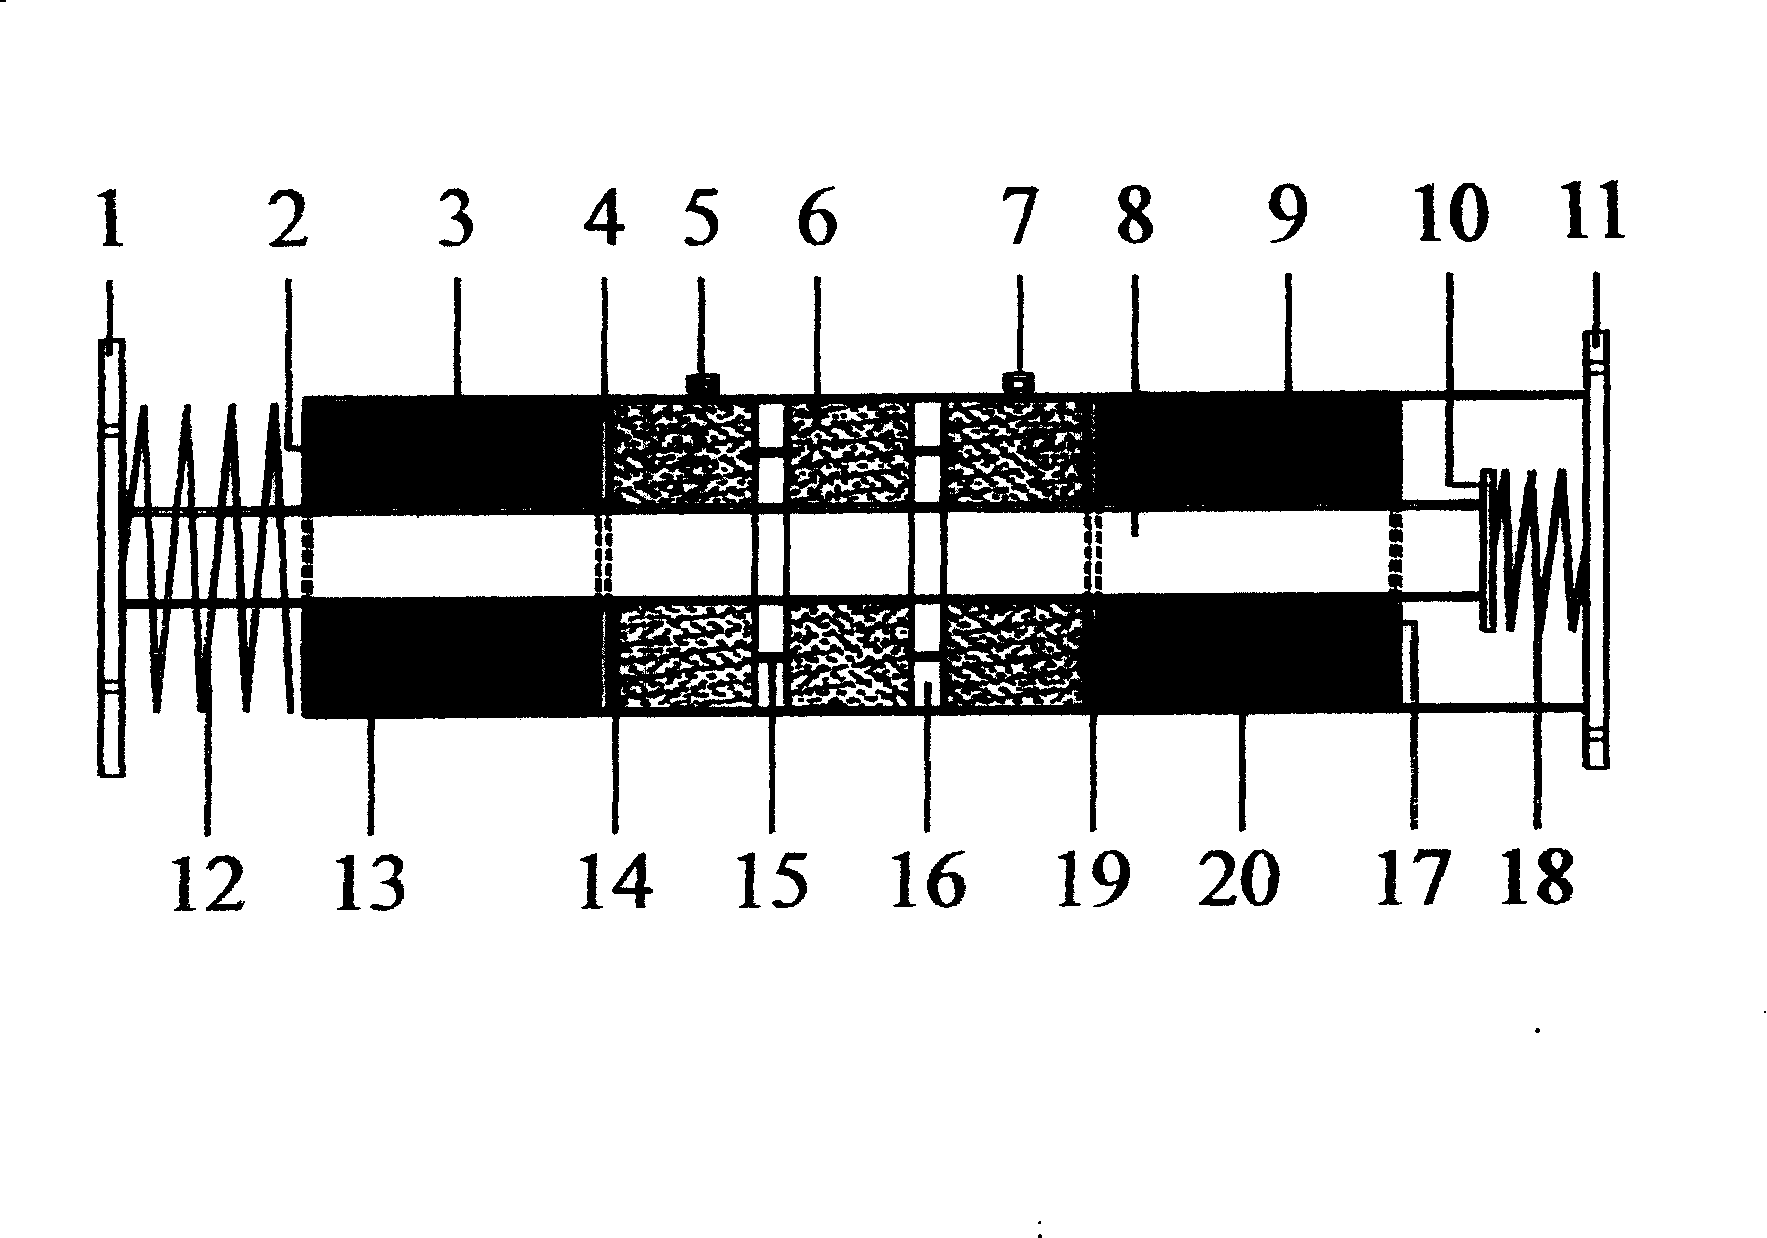 High performance composite shock absorber